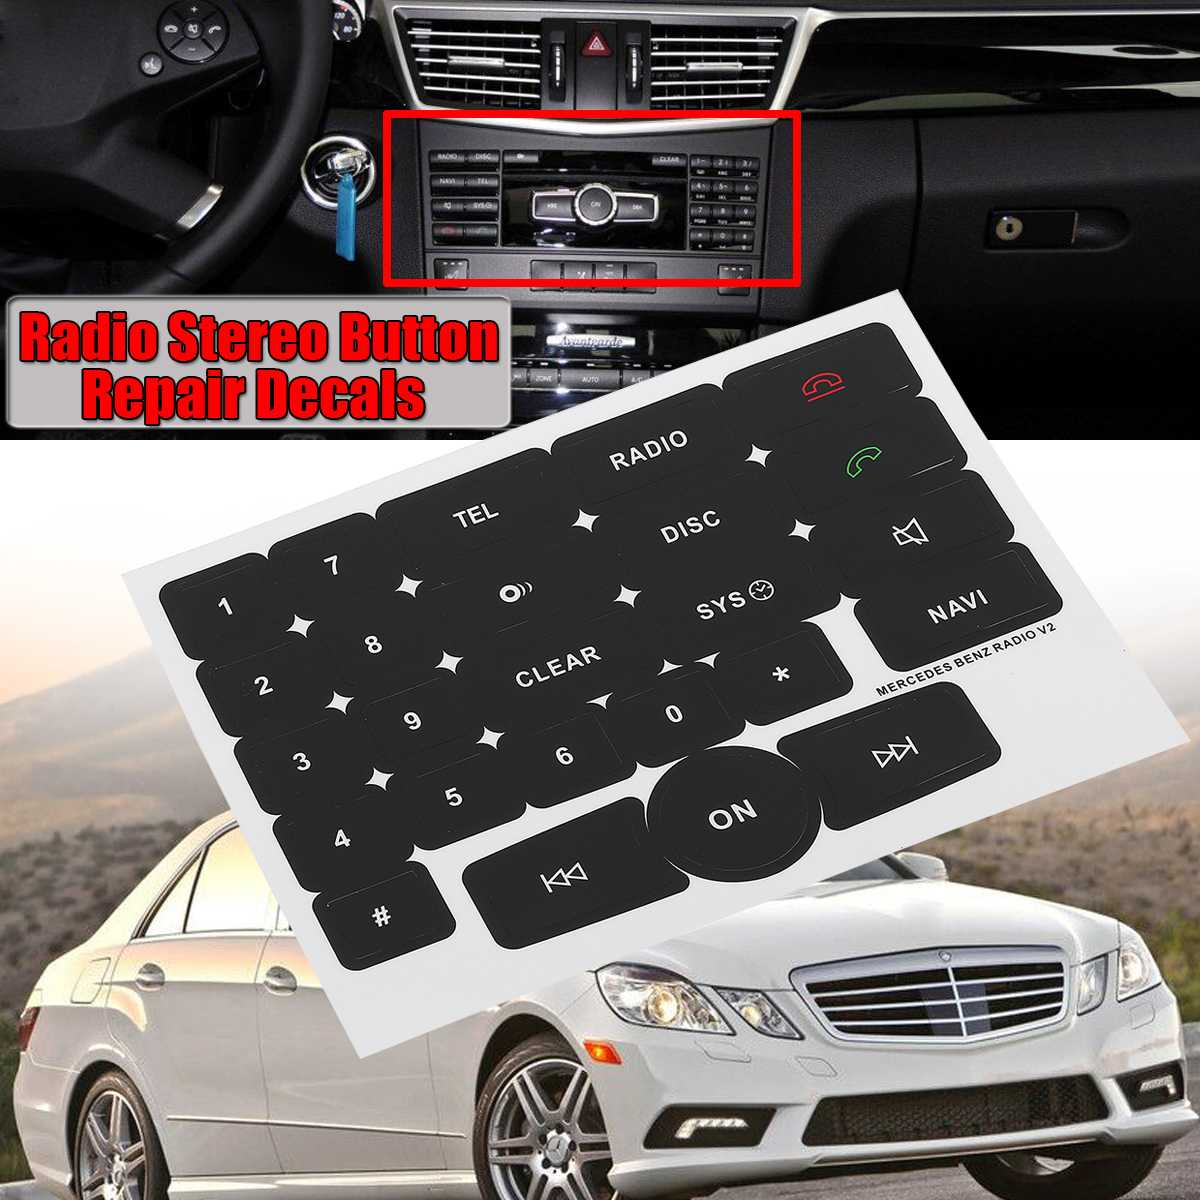 Stereo Button Repair Decals Stickers For Mercedes For Benz Radio V2 Re –  KIWI CAR PARTS